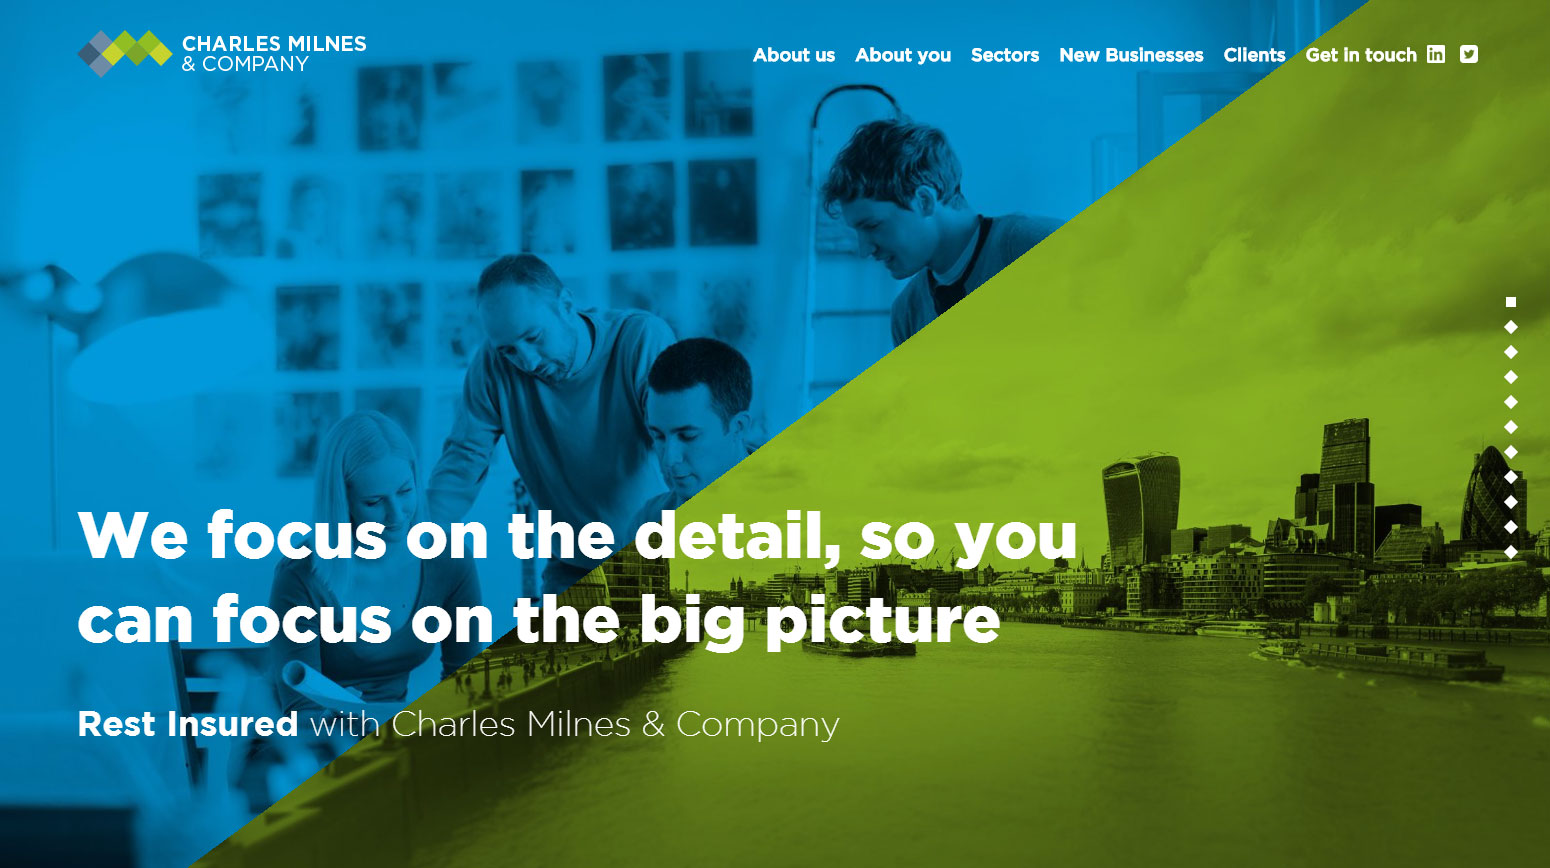 Charles Milnes & Company - Website of the Day